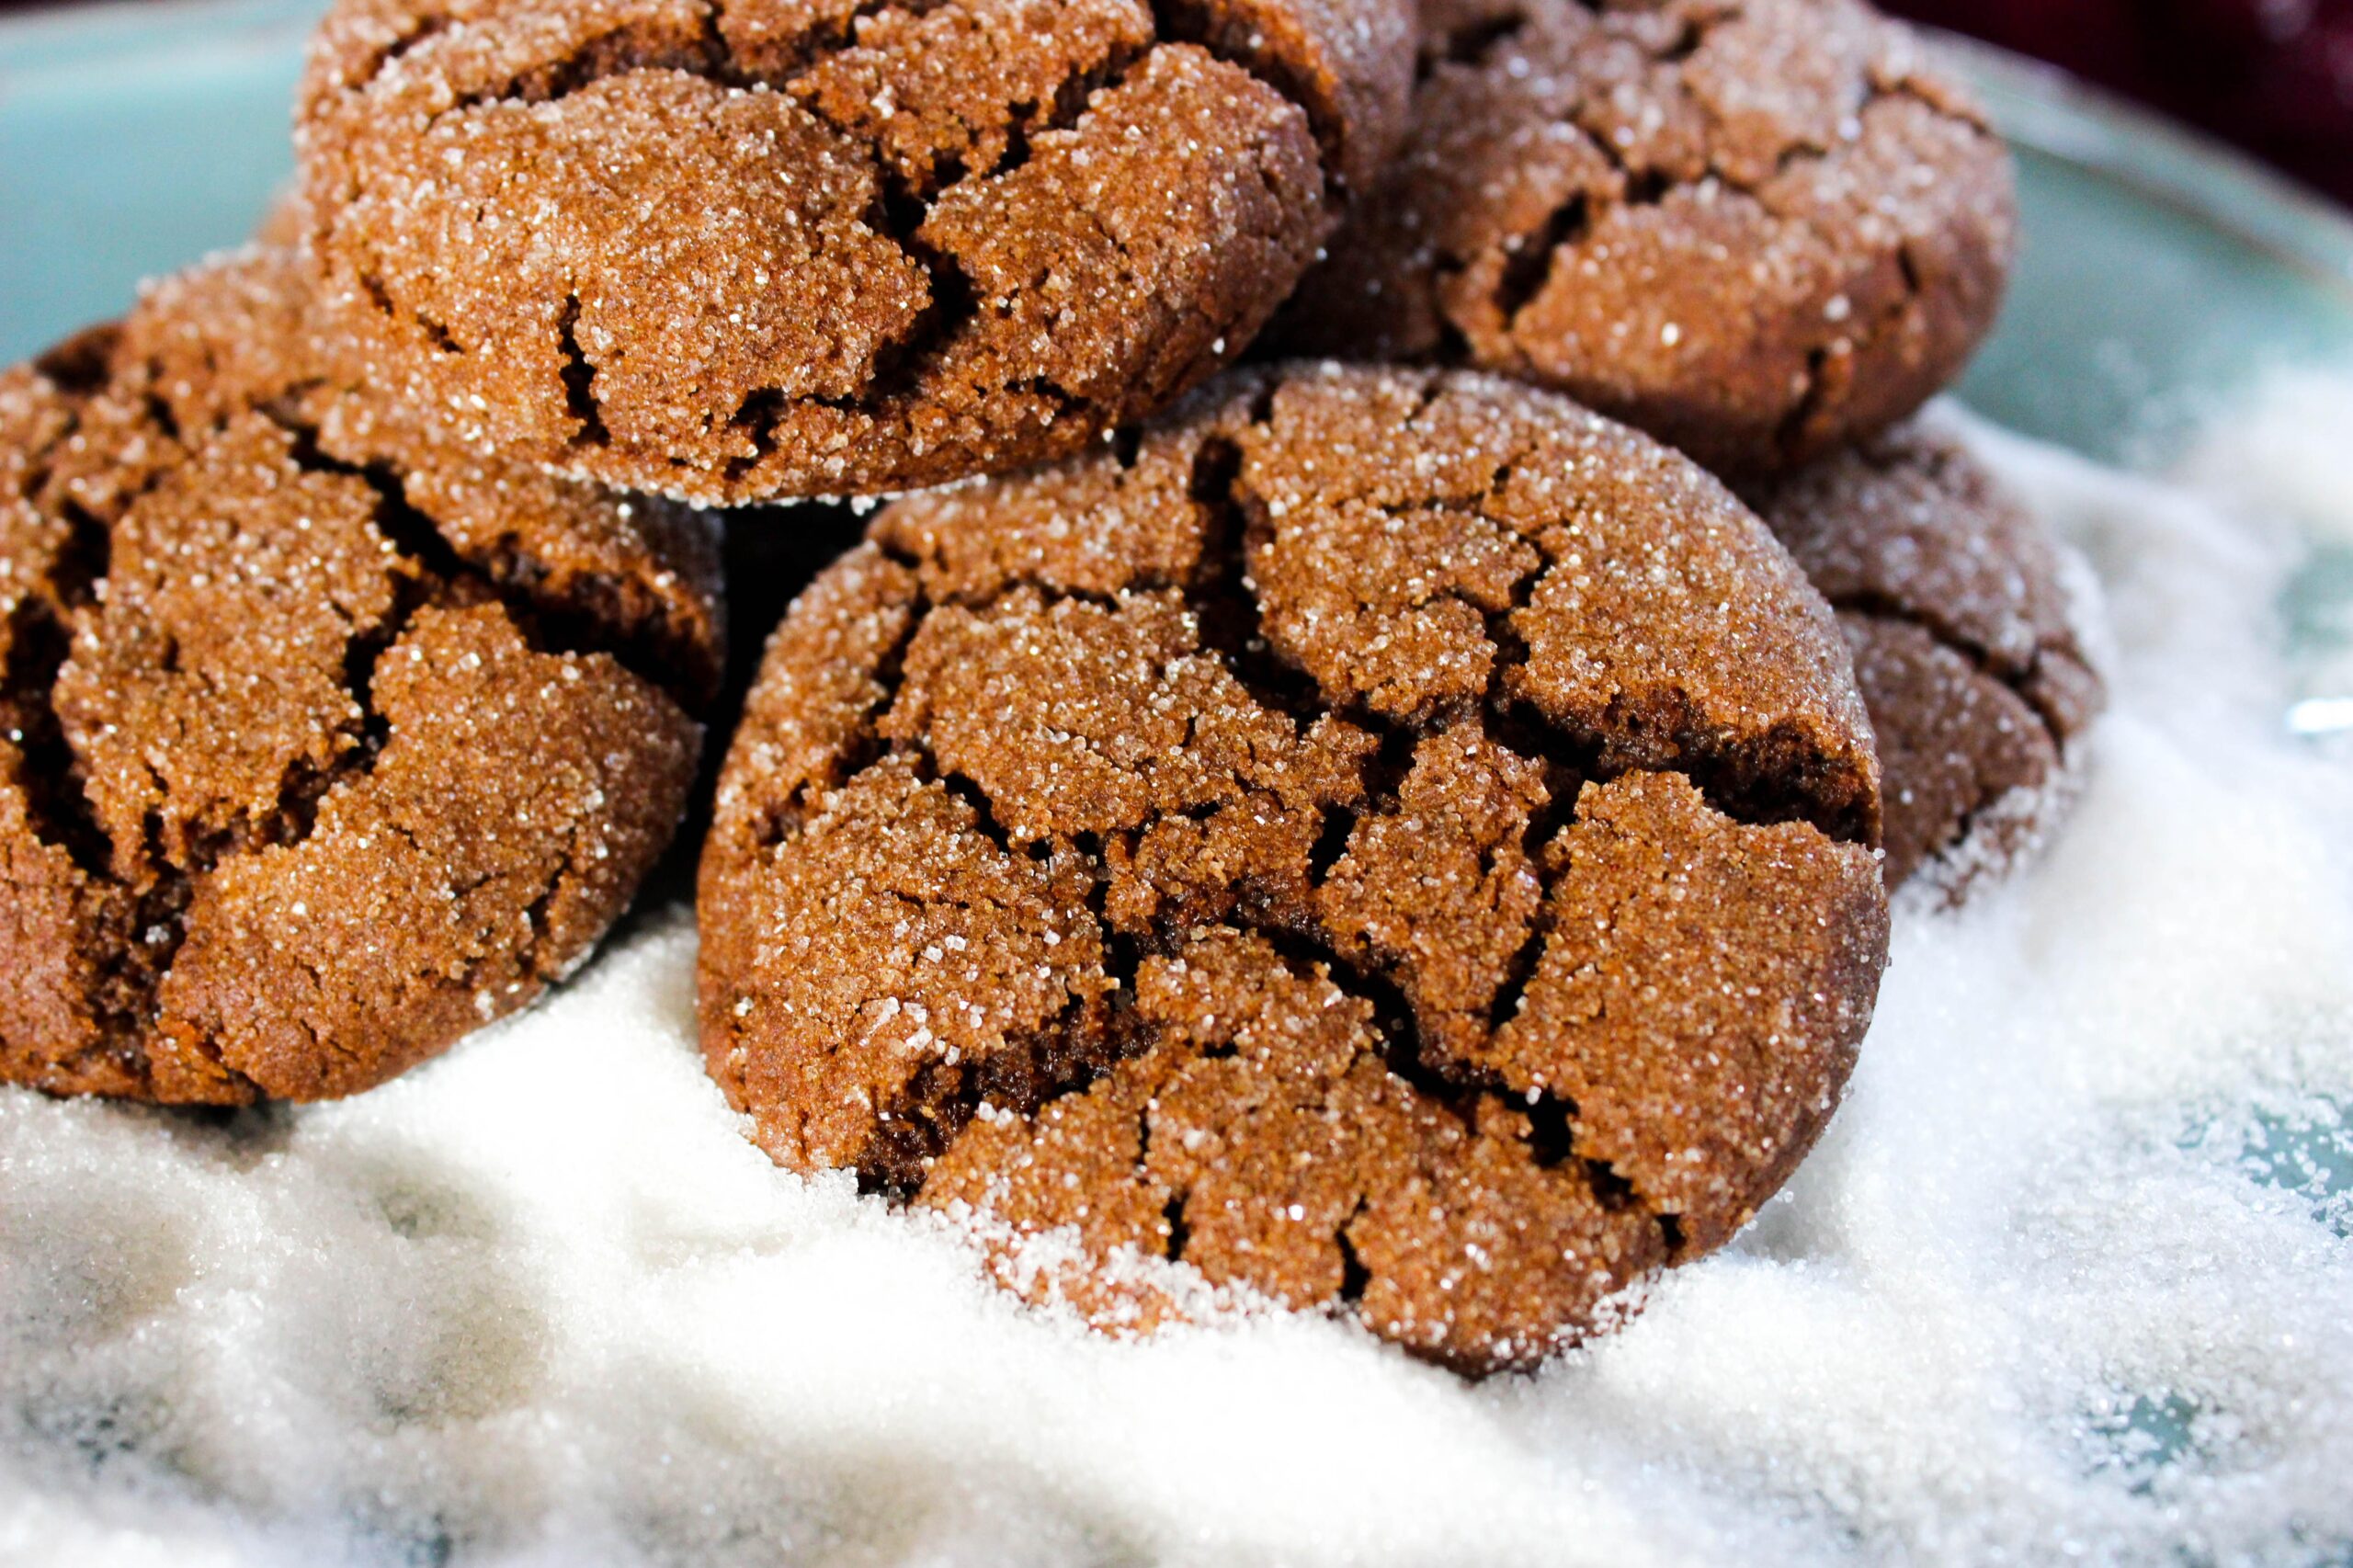  Who says you can't have your hot chocolate in cookie form? These snickerdoodles are the ultimate hybrid treat.